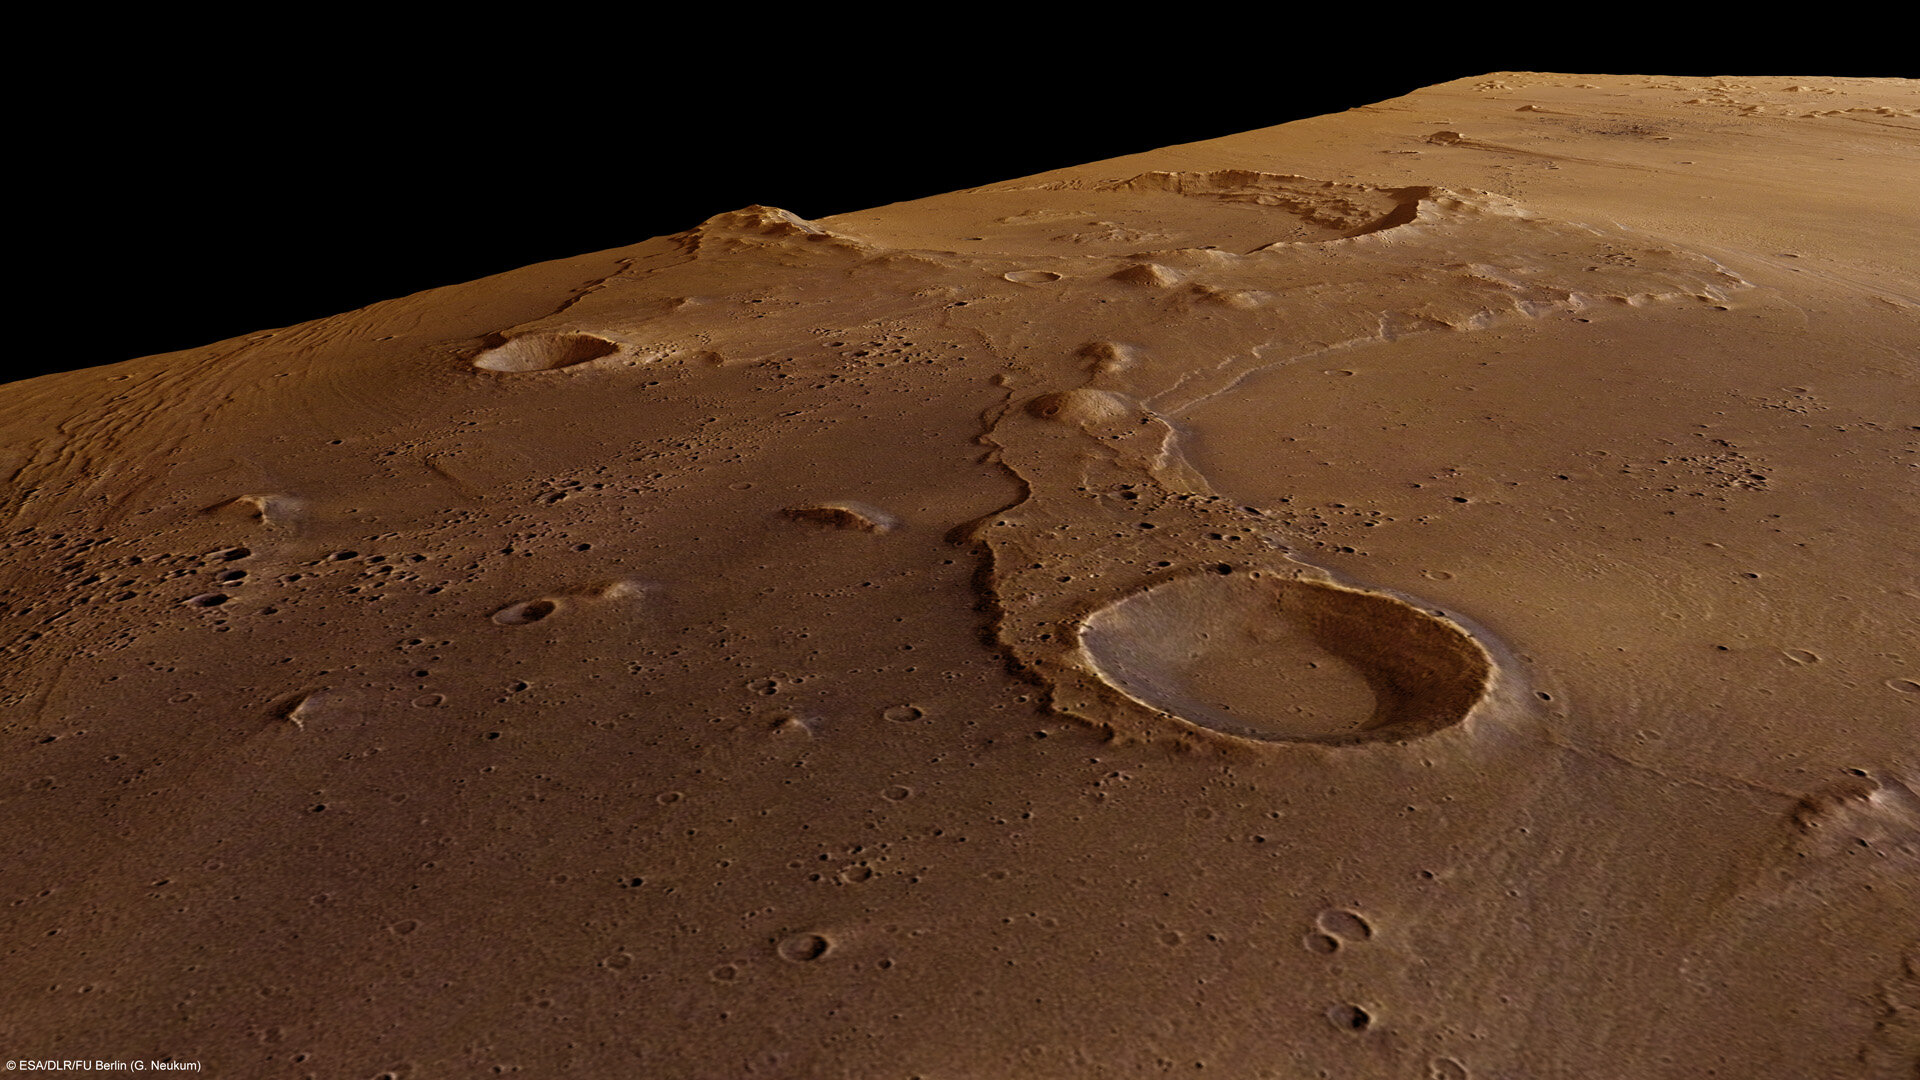 Ares Vallis in perspective